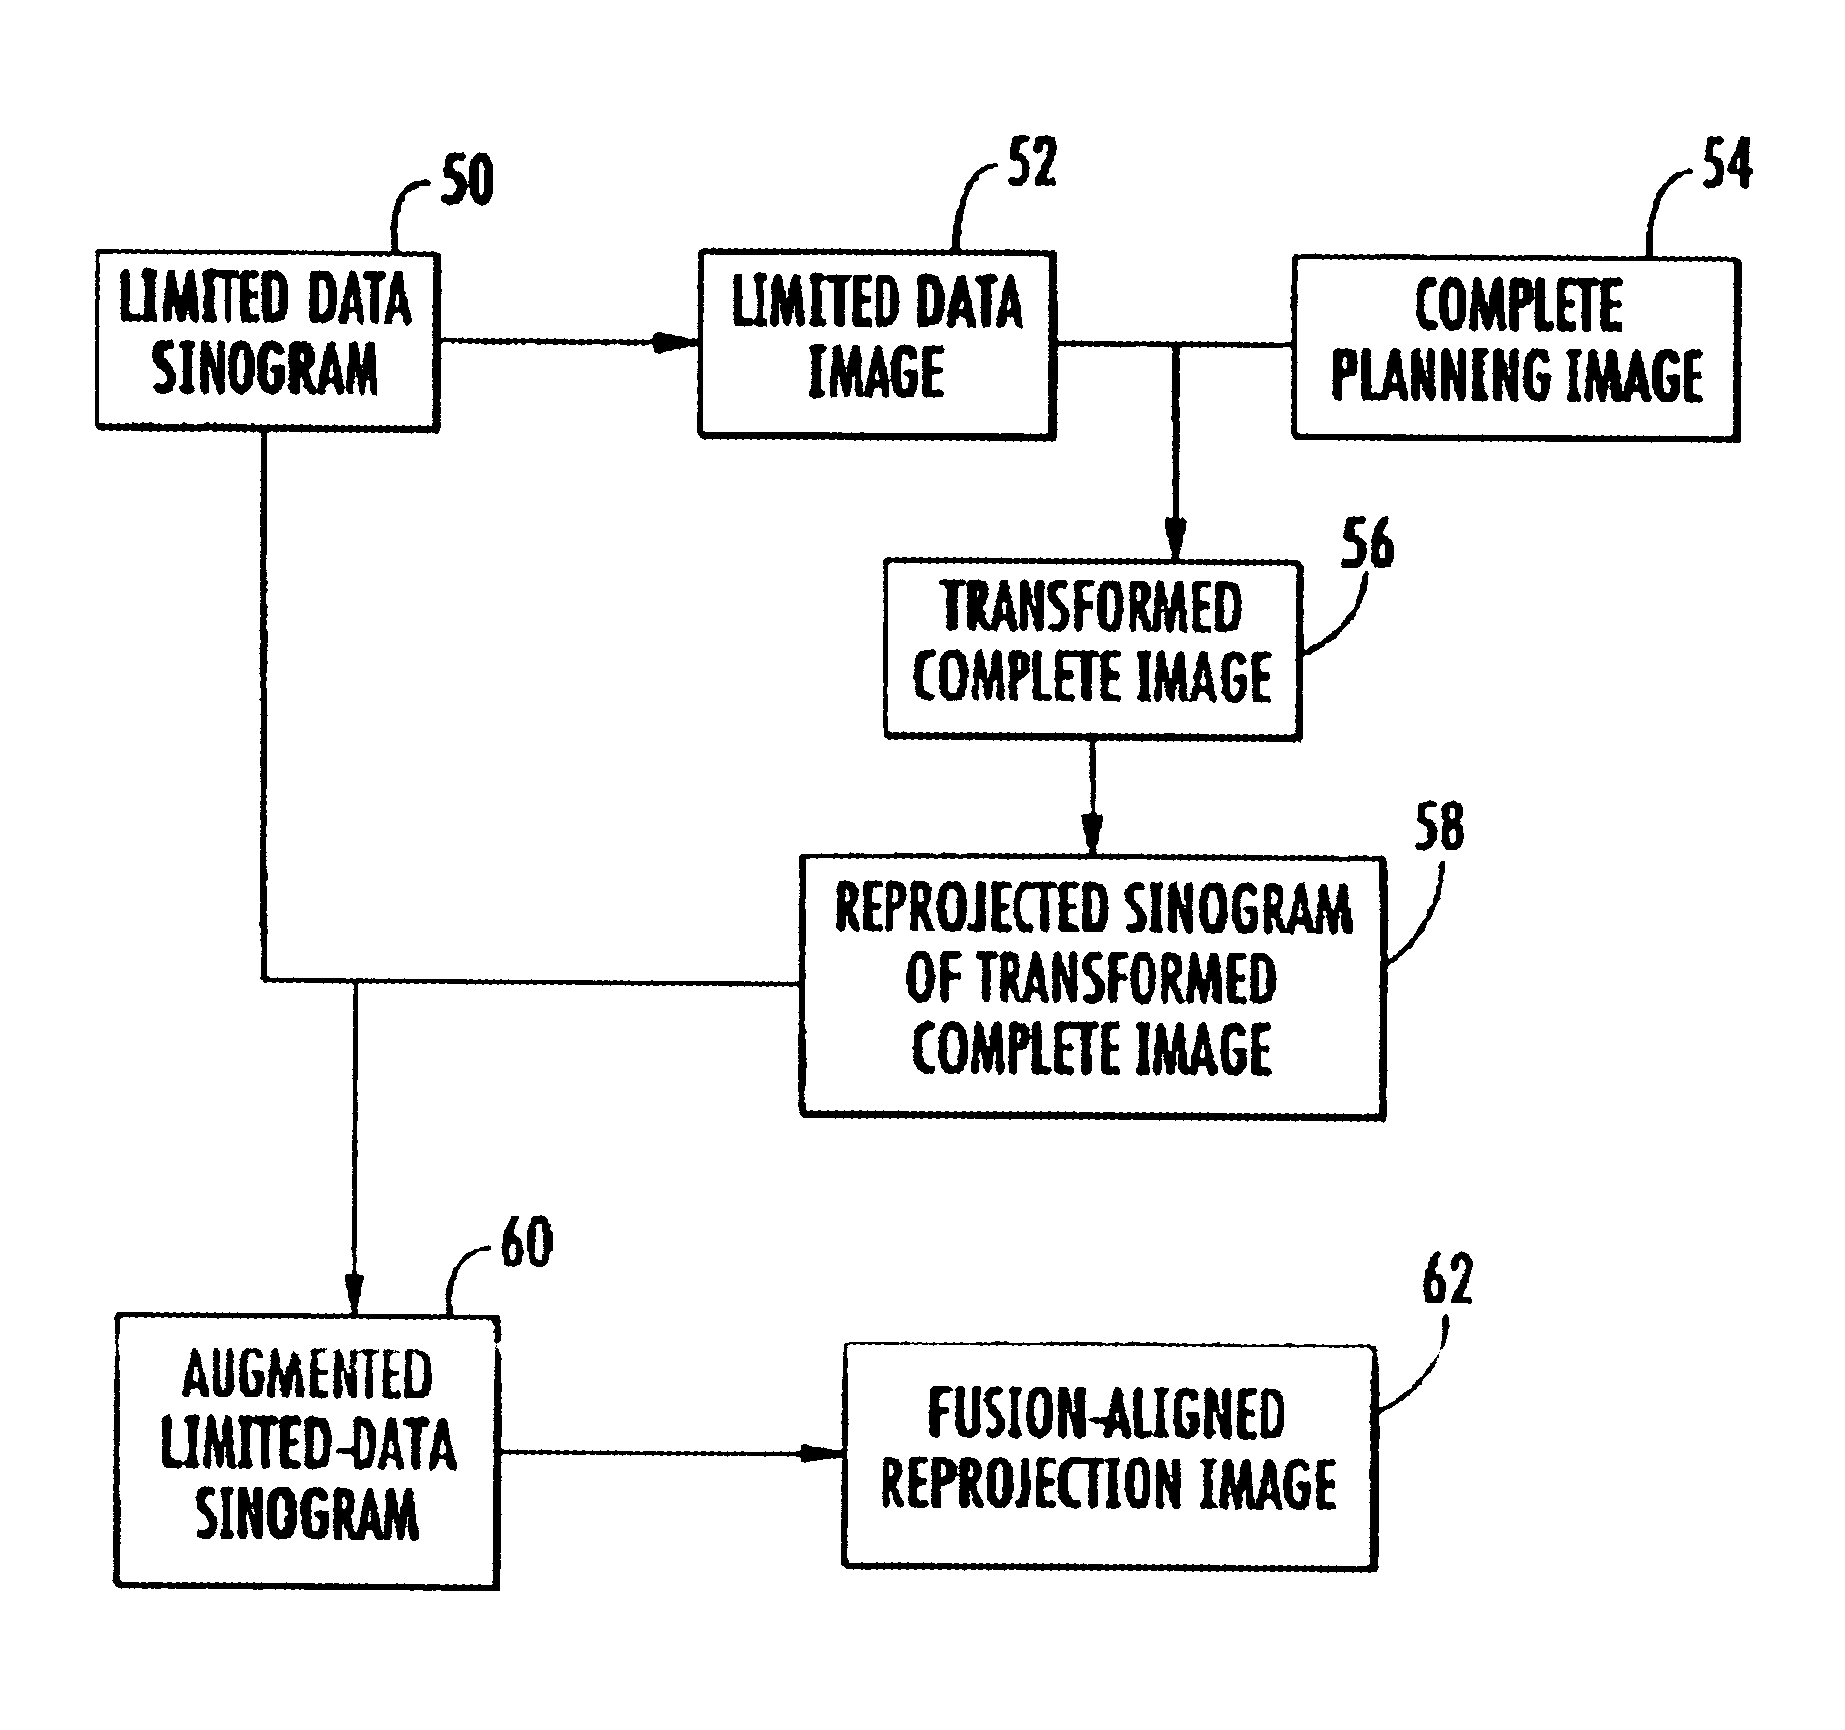 Method for reconstruction of limited data images using fusion-aligned reprojection and normal-error-aligned reprojection